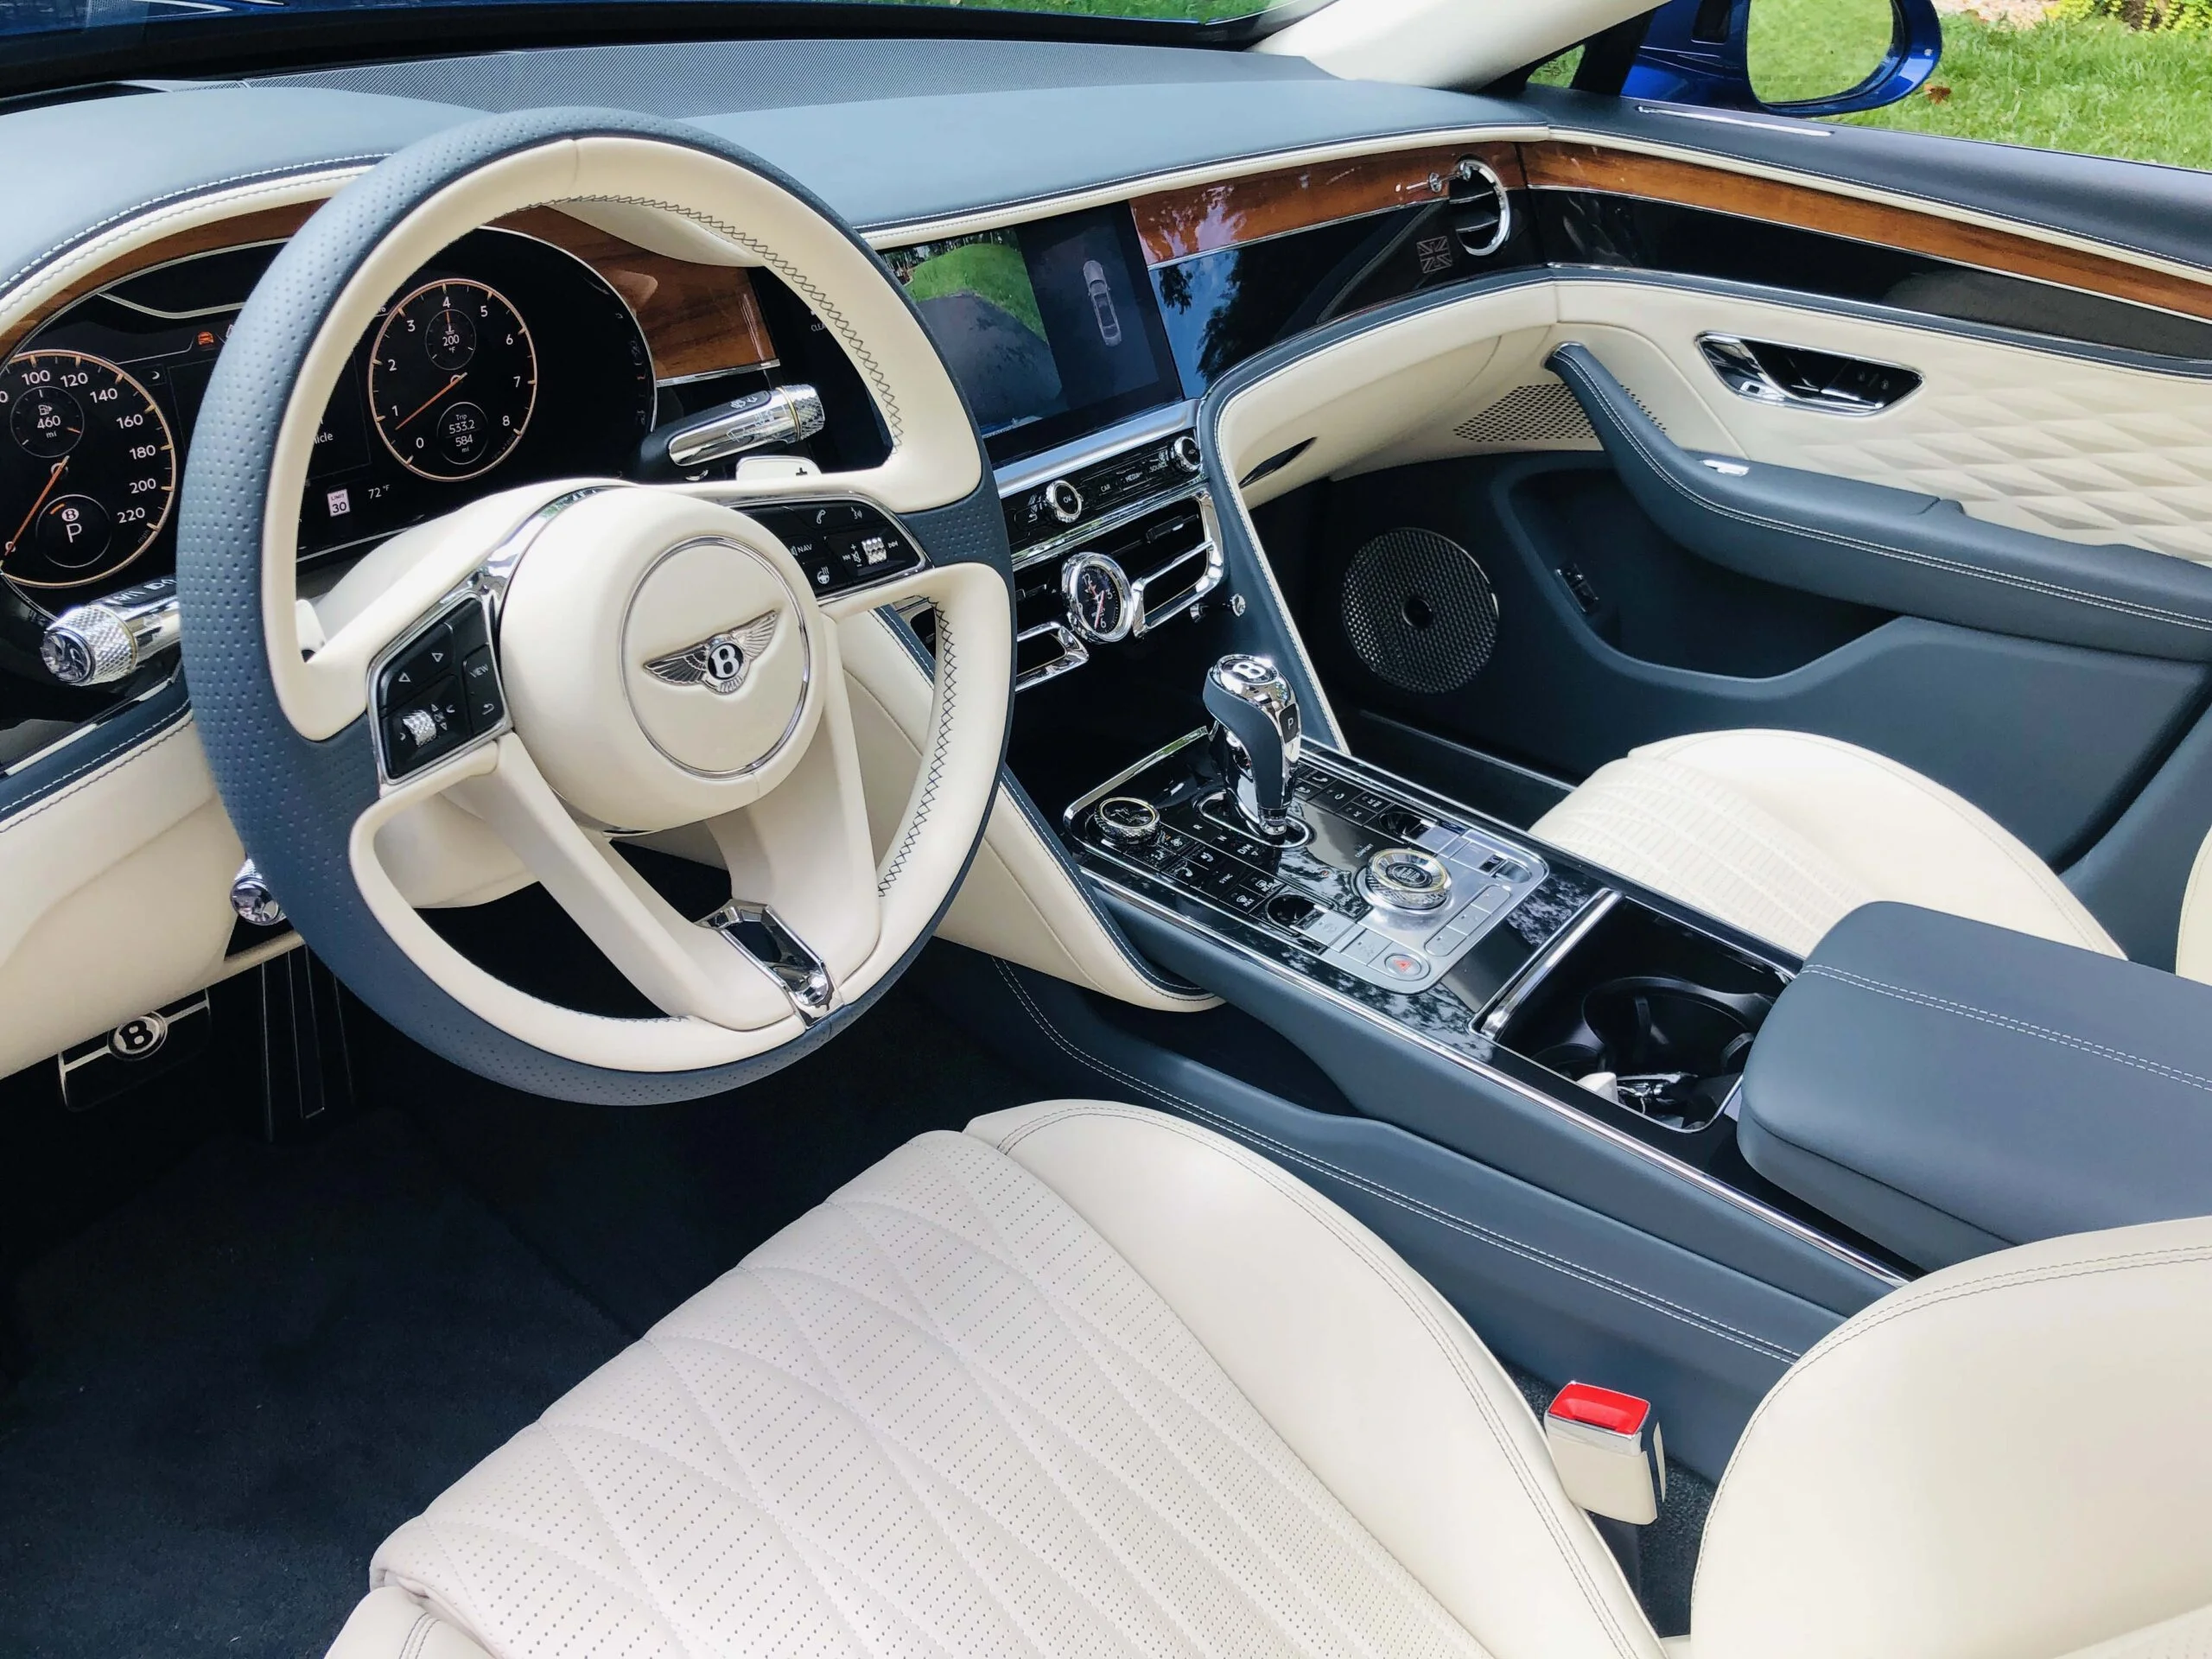 Brand New Bentley Flying Spur Latest Interior Images →